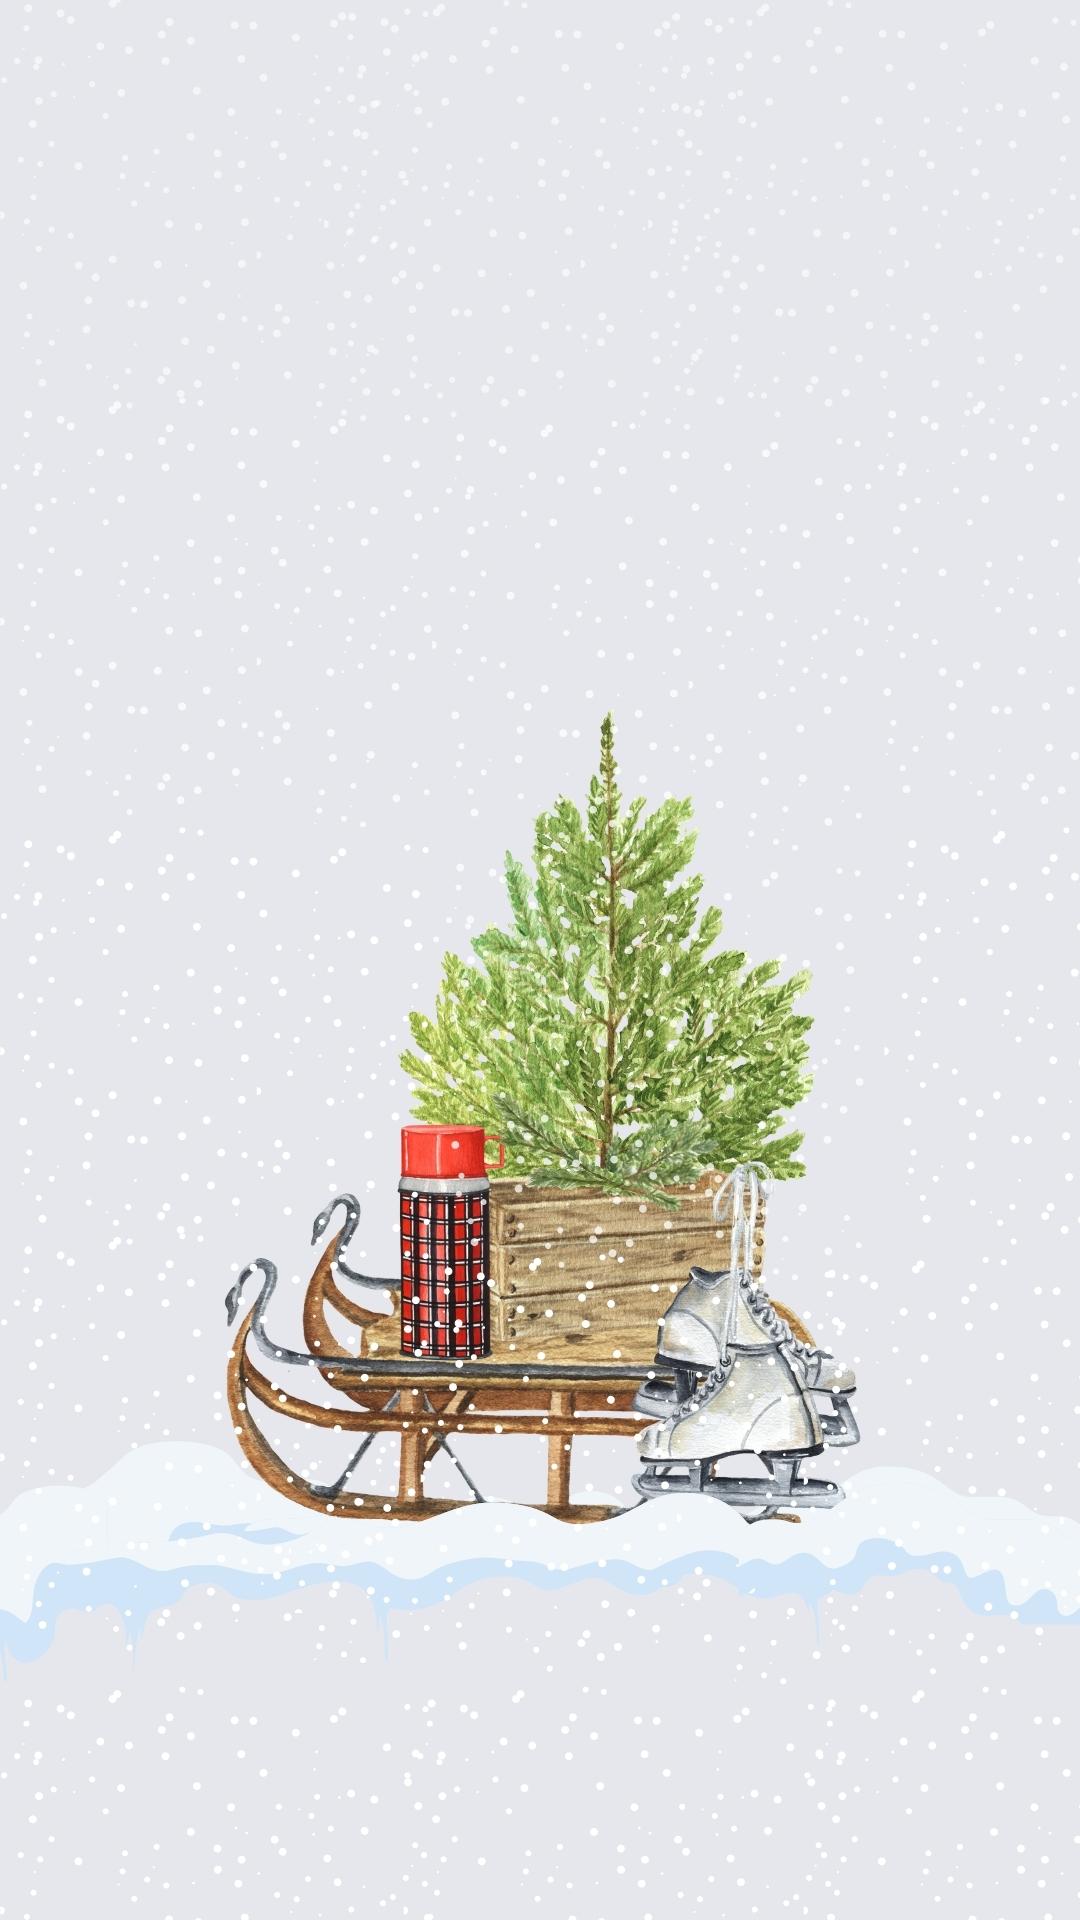 Watercolor Christmas phone wallpaper background of a vintage sled with Christmas tree, plaid thermos and ice skates. 